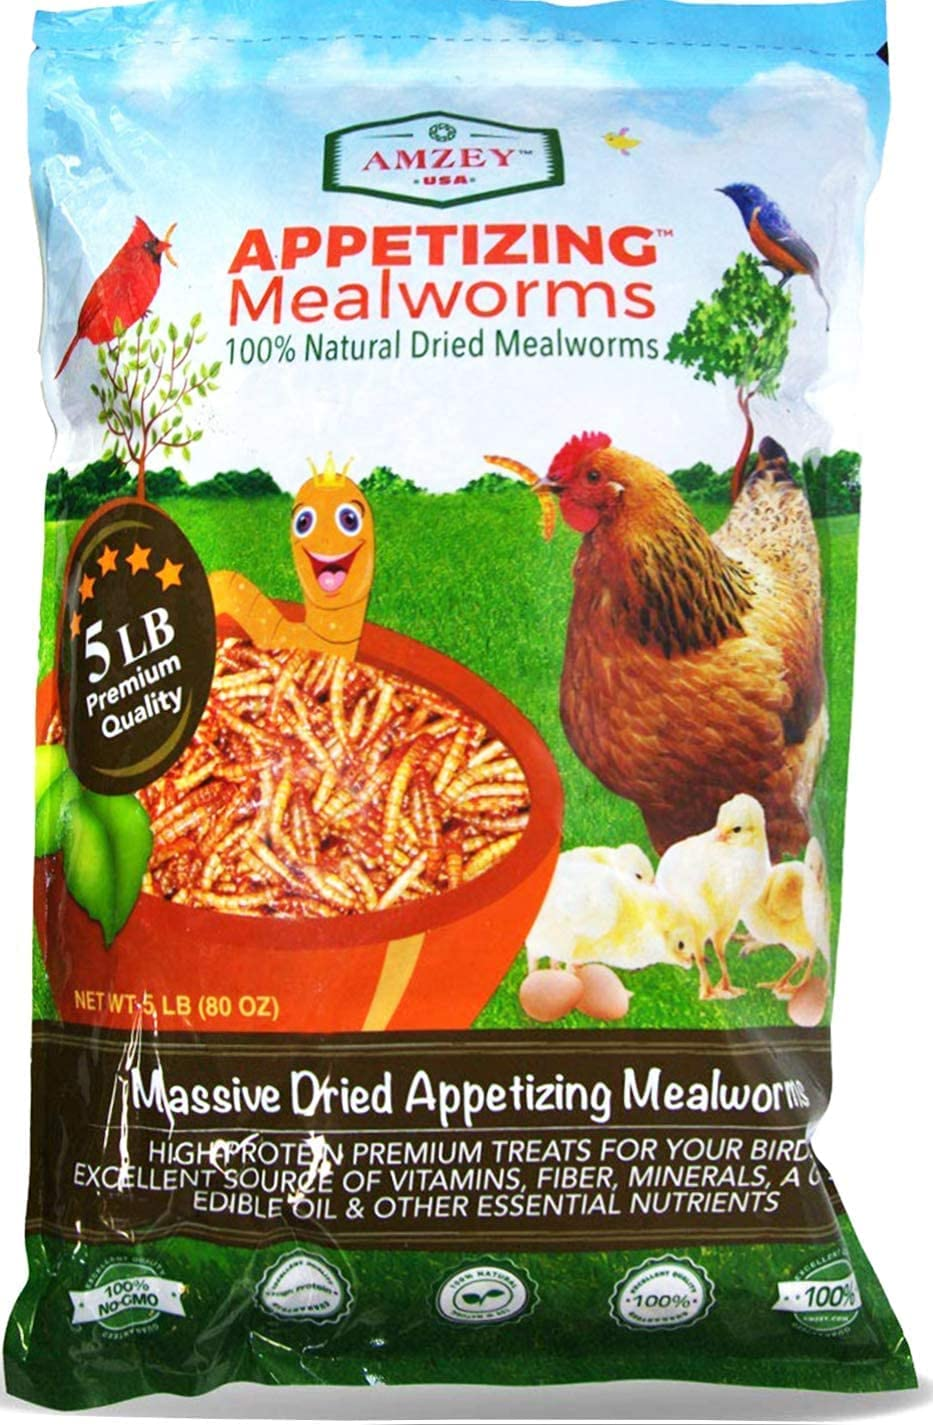 Mealworms -5 Lbs- 100% Non-Gmo Dried Mealworms - Large Meal Worms - Bulk Mealworms -High Protein Treats- Perfect Mealworm for Chickens, Ducks, Turtles, Blue Birds, Lizards - Bag of Mealworms 5 LBS